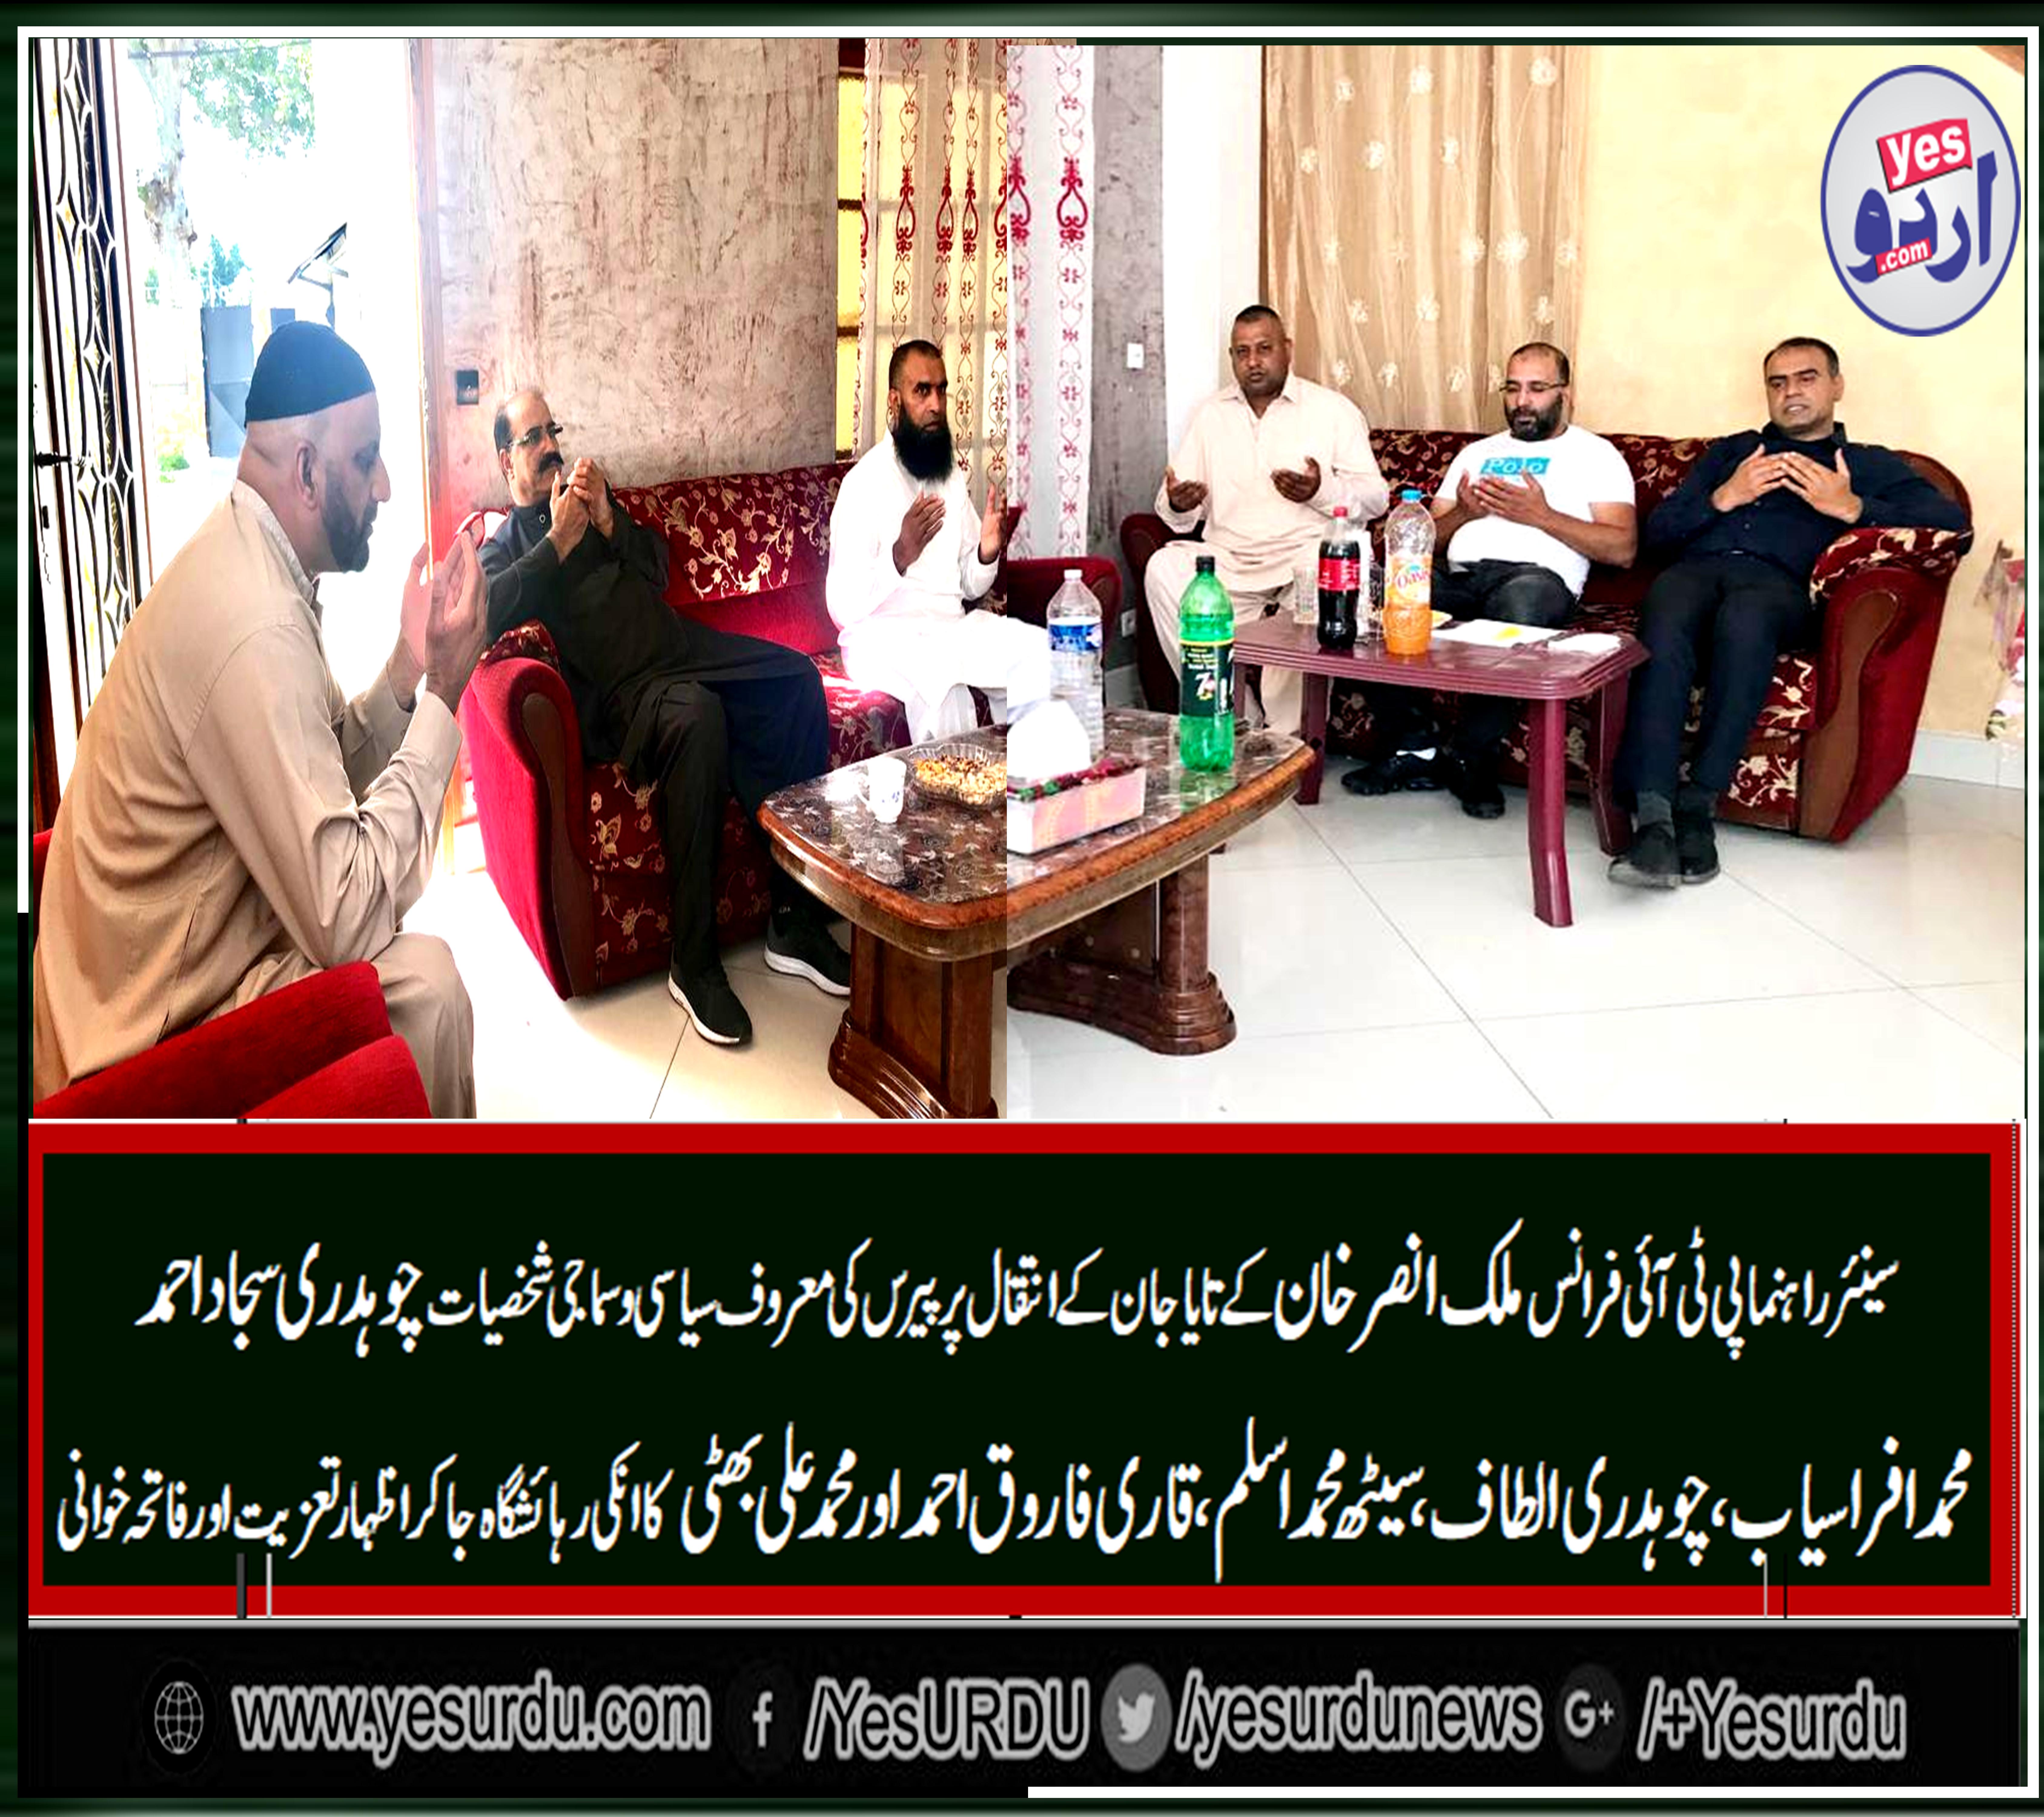 Paris, reknown, social, and, political, personalities, visited, malik ansar khan, house, for, condolence, on, his, uncle's, death